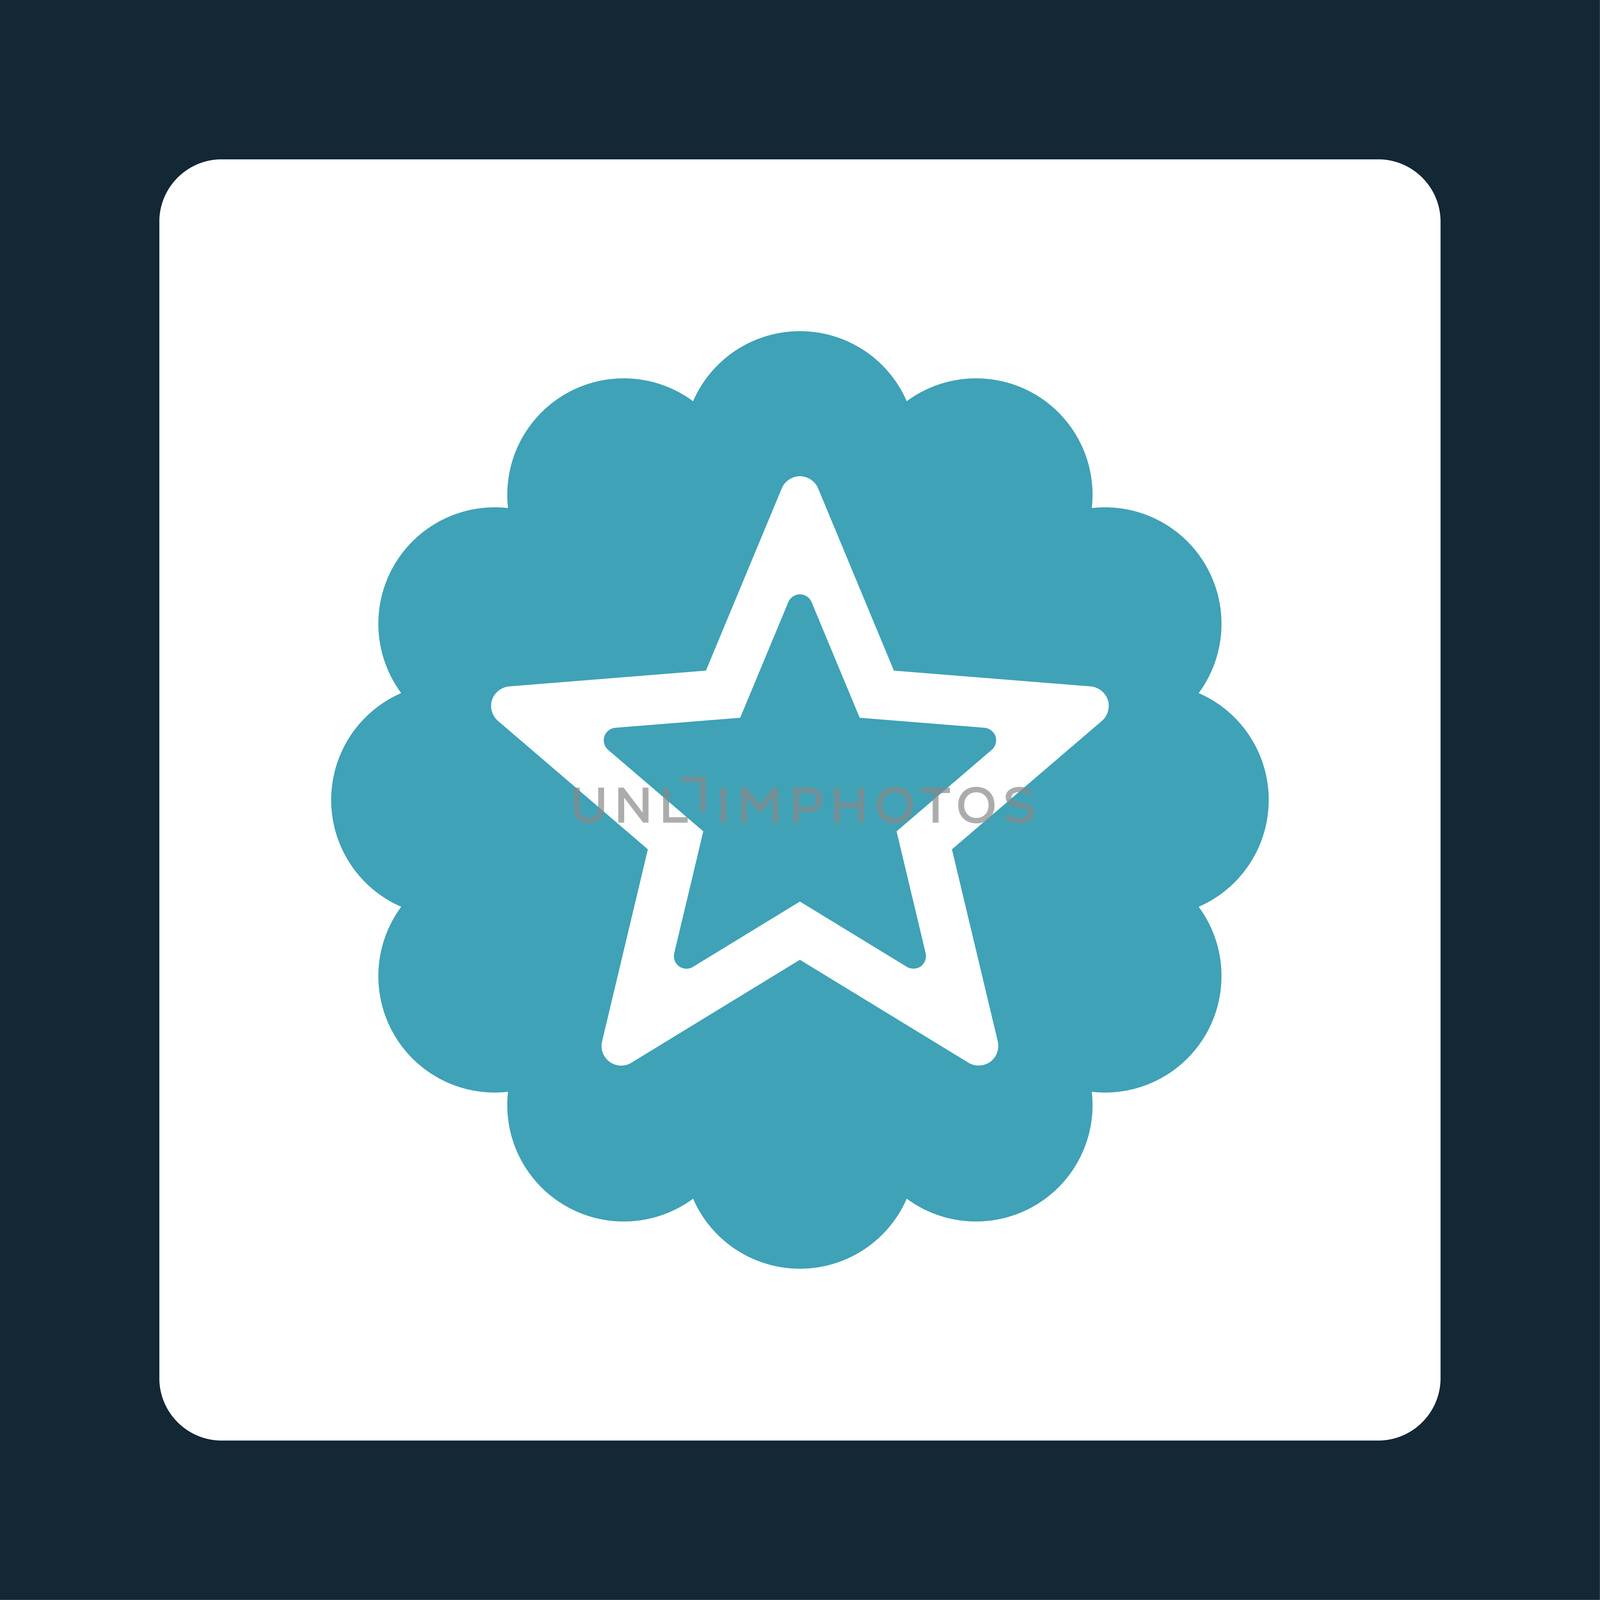 Premium icon from Award Buttons OverColor Set. Icon style is blue and white colors, flat rounded square button, dark blue background.